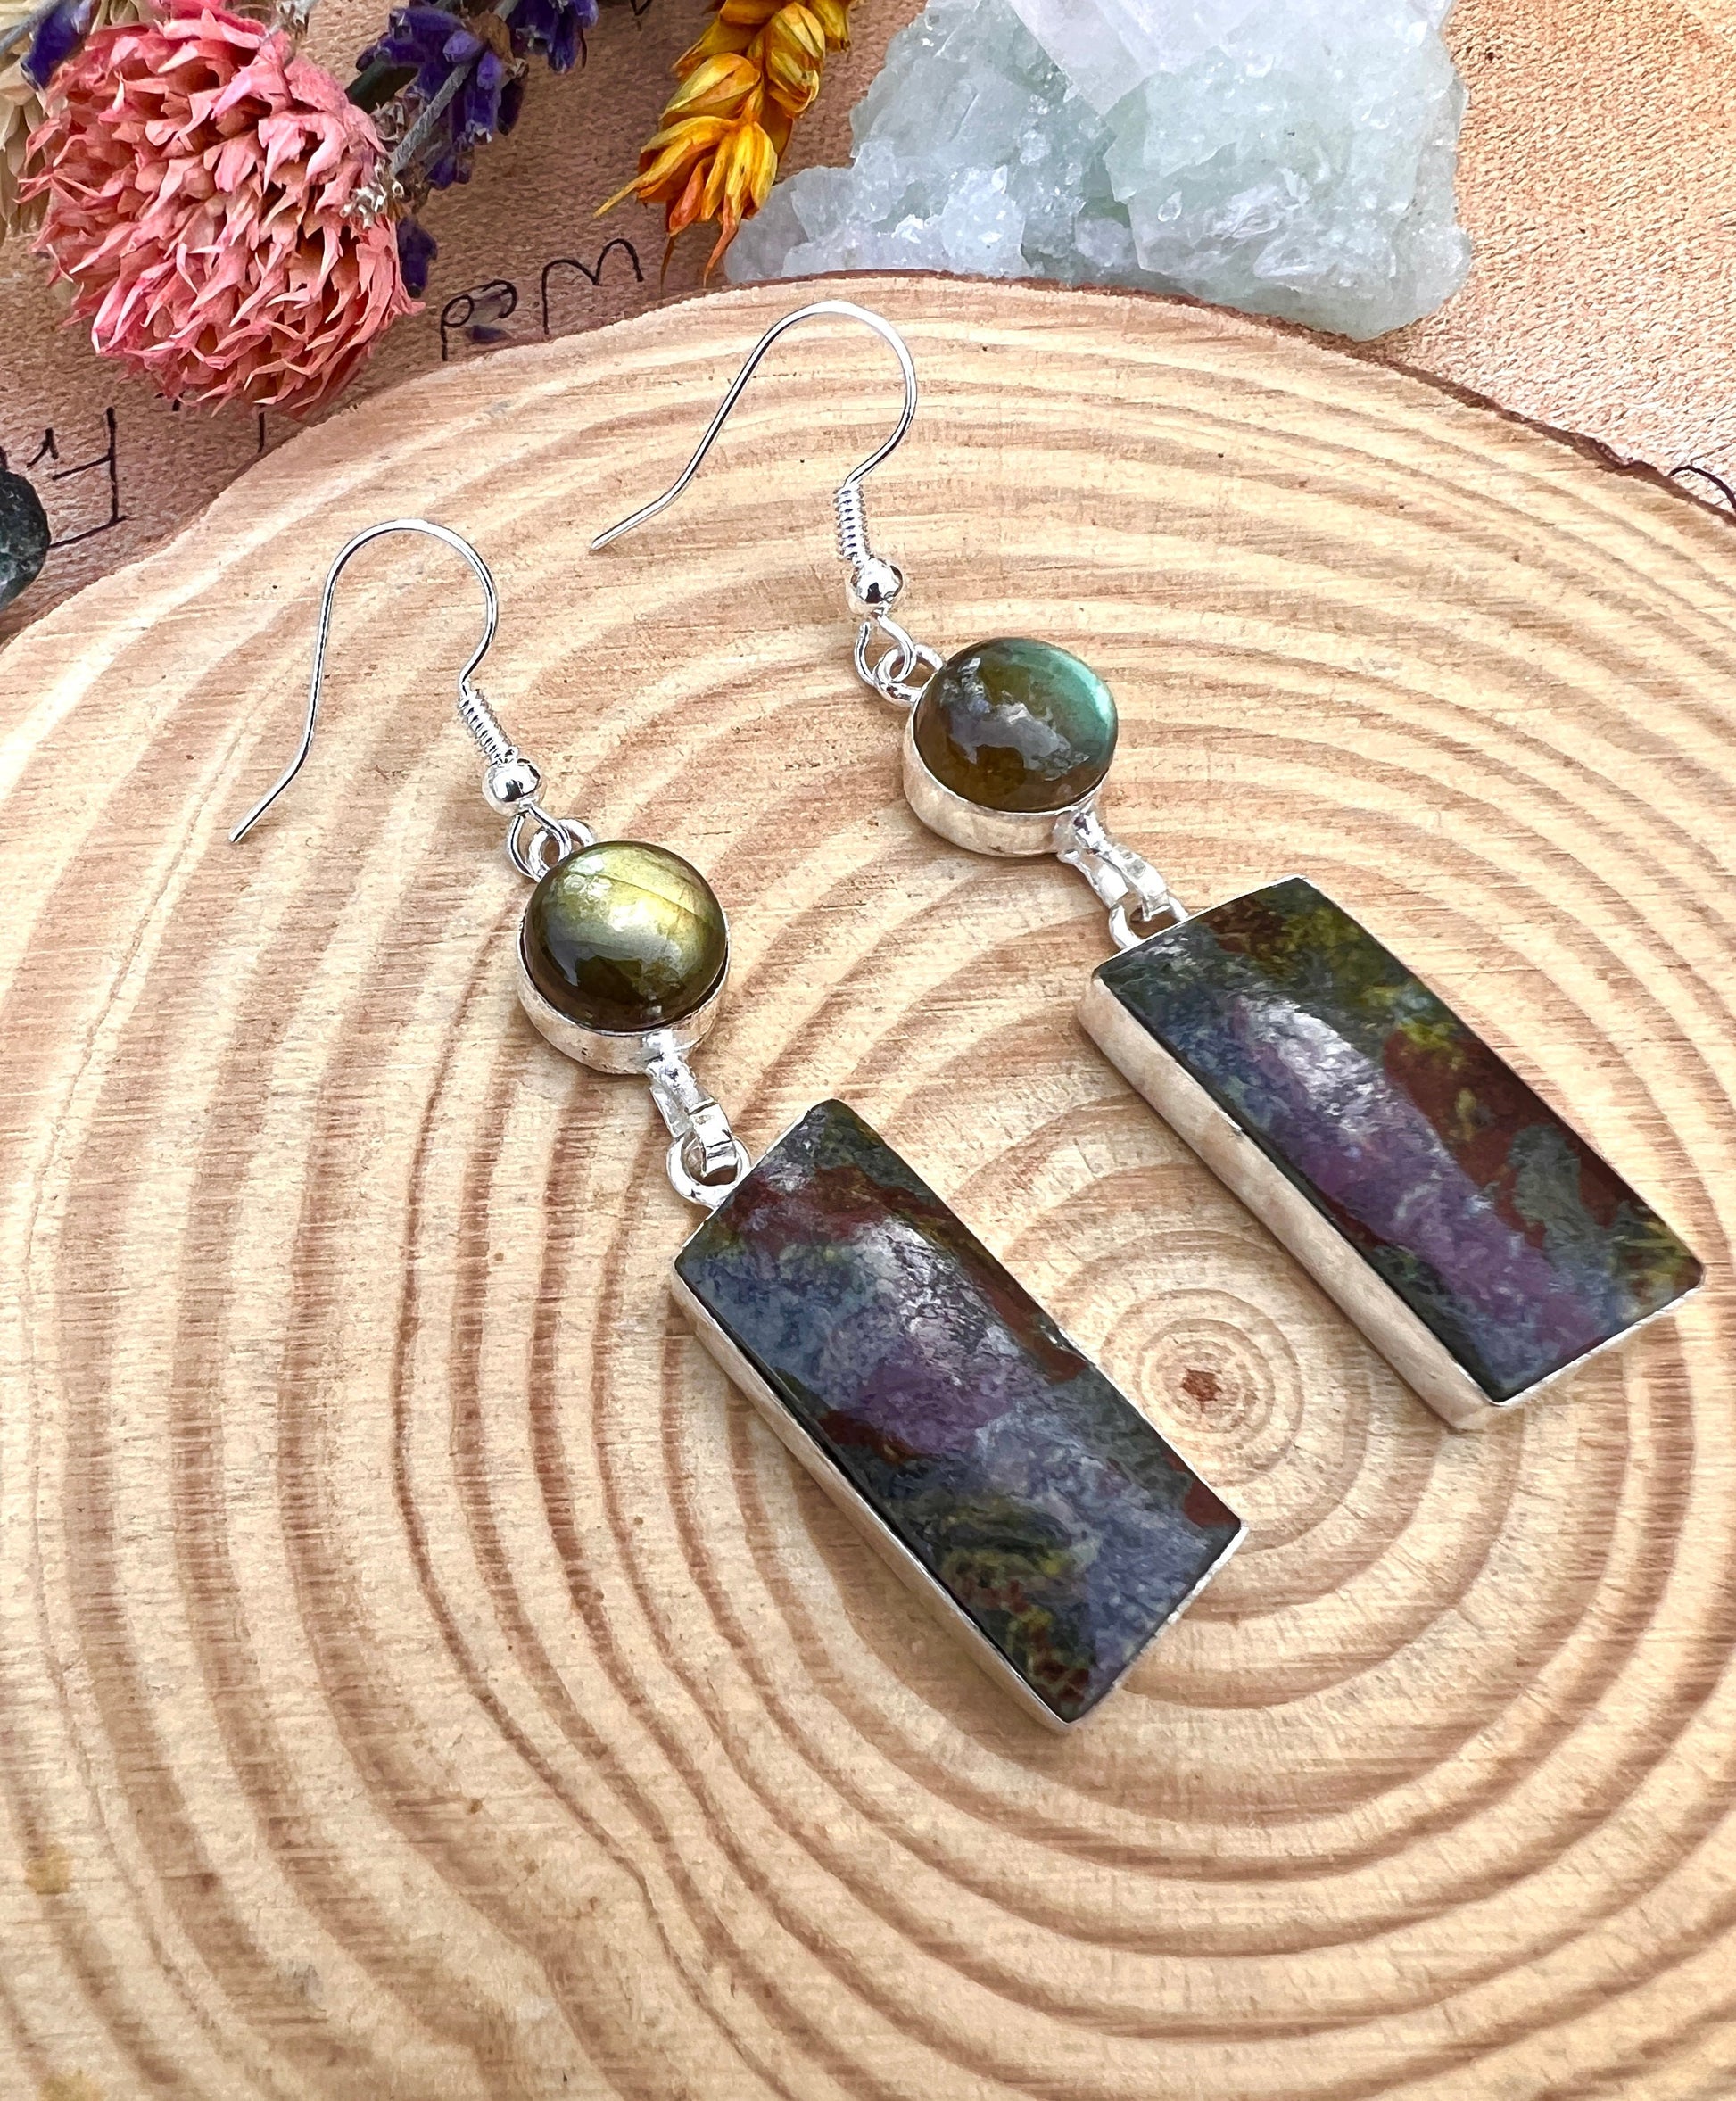 Dragon Blood Agate Labradorite Earrings Statement Necklace In Sterling Silver